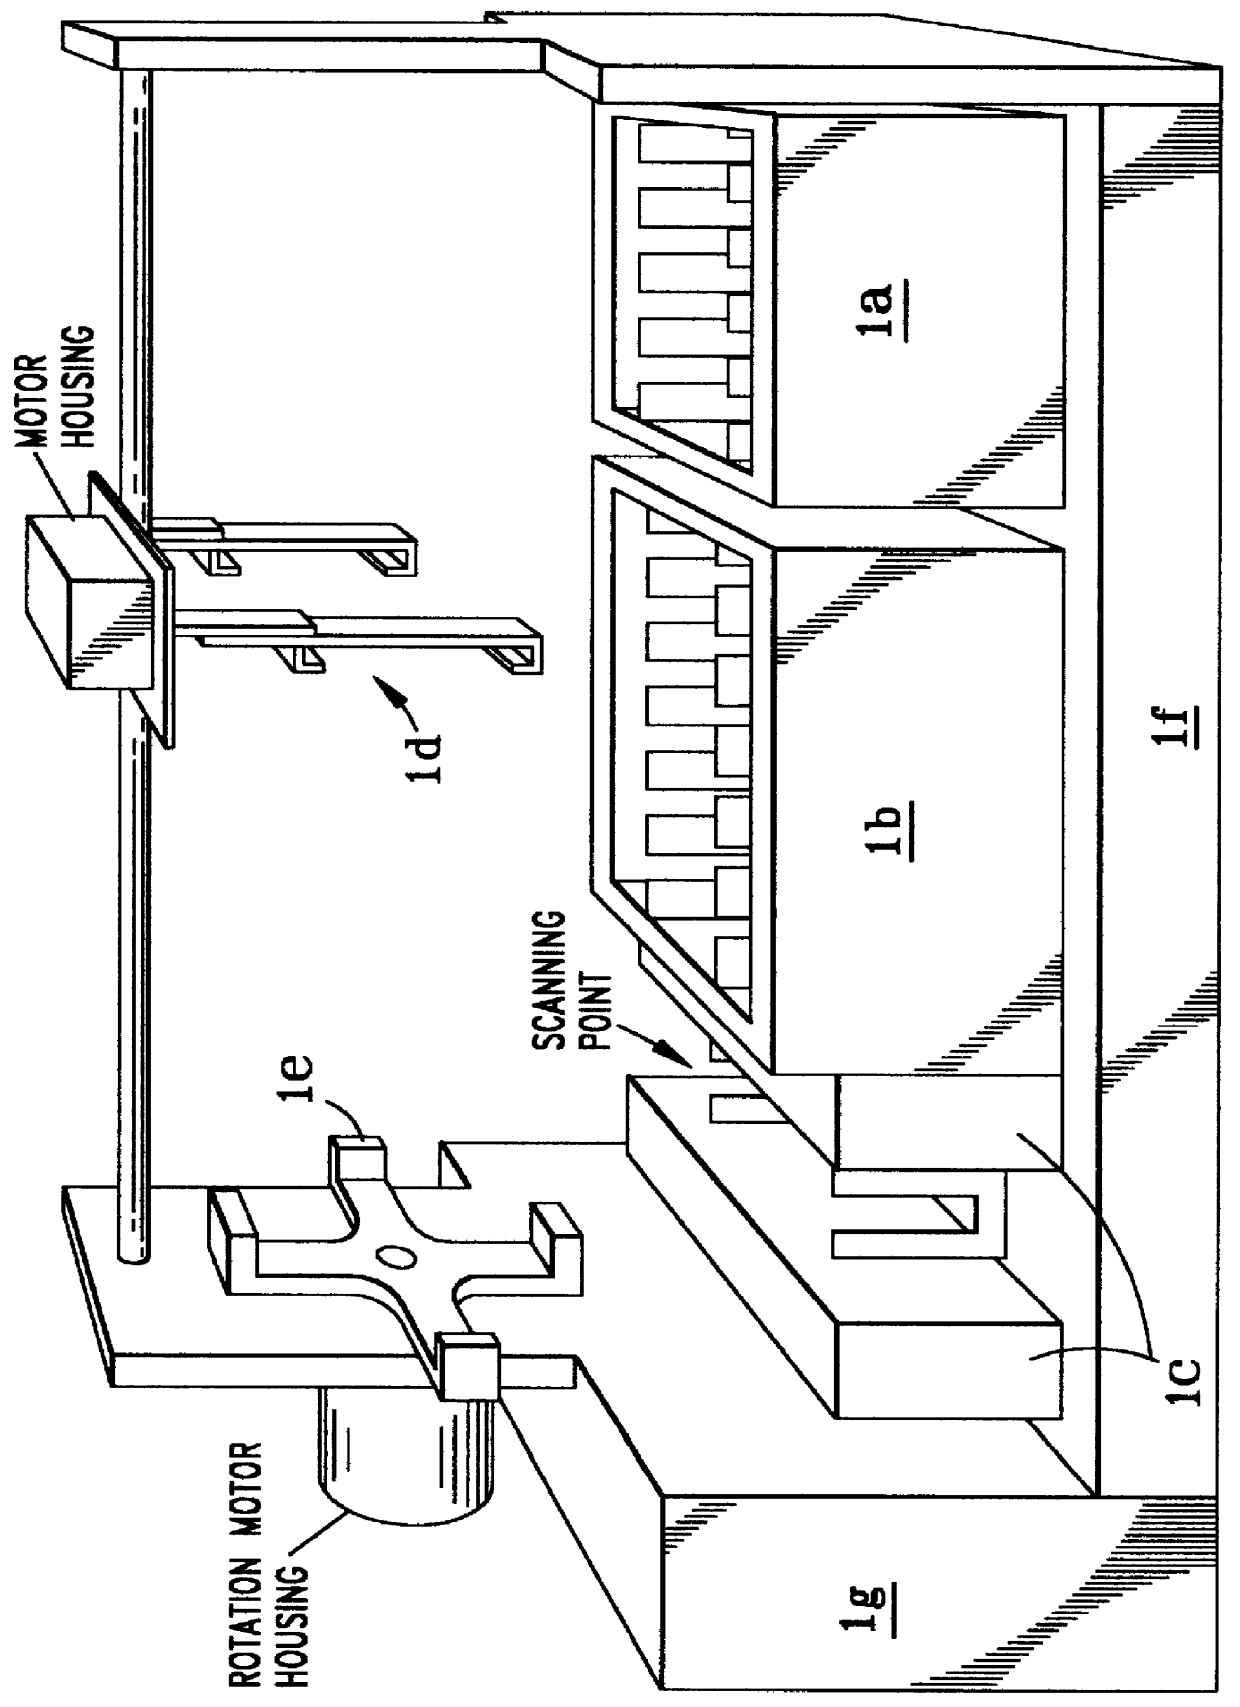 Automatic protein and/or DNA analysis system and method